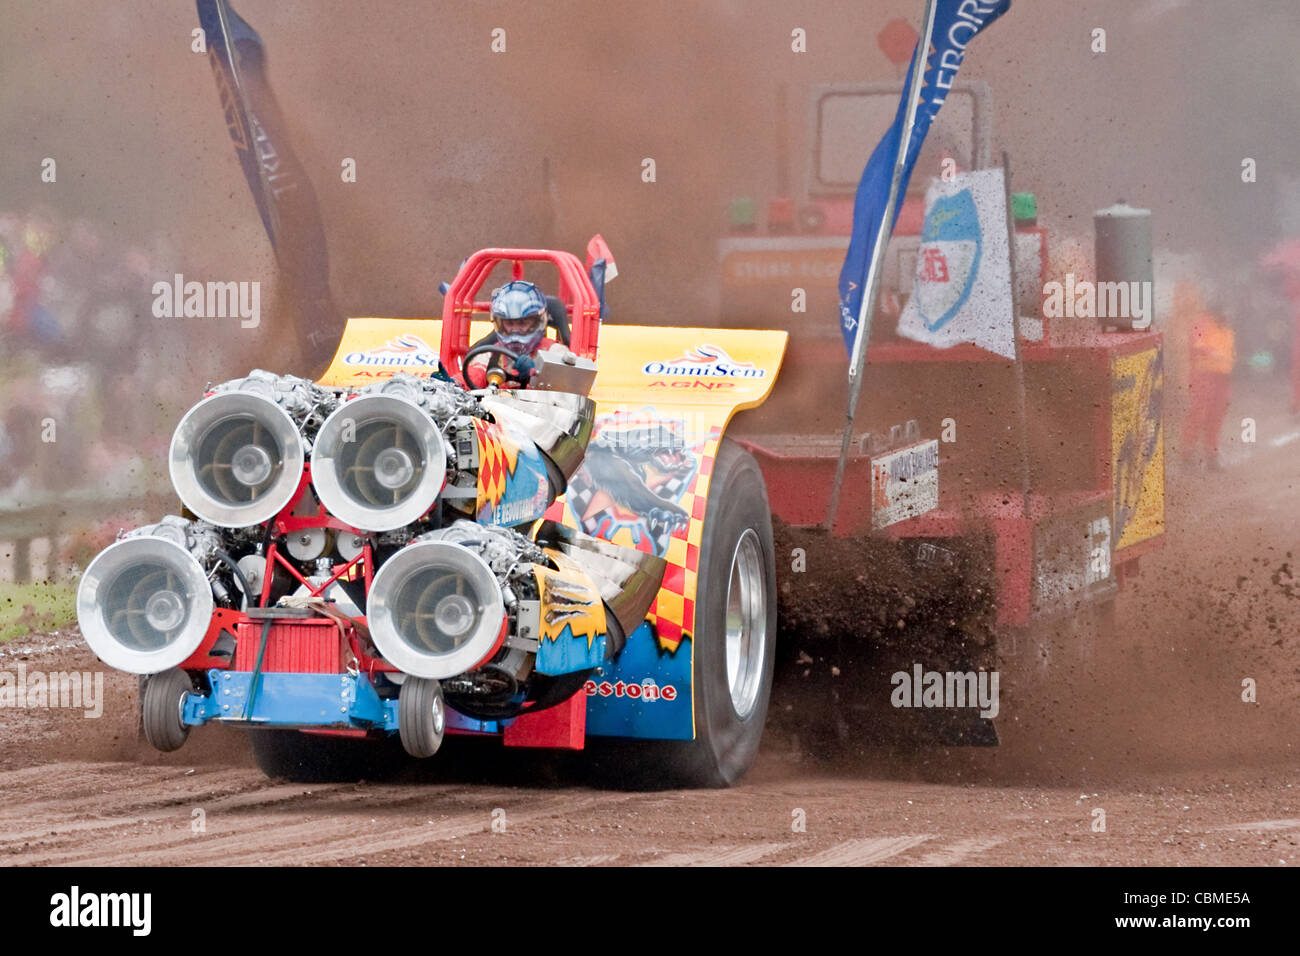 No fewer than four jet engines power this monster machine competing in a tractor  pulling contest Stock Photo